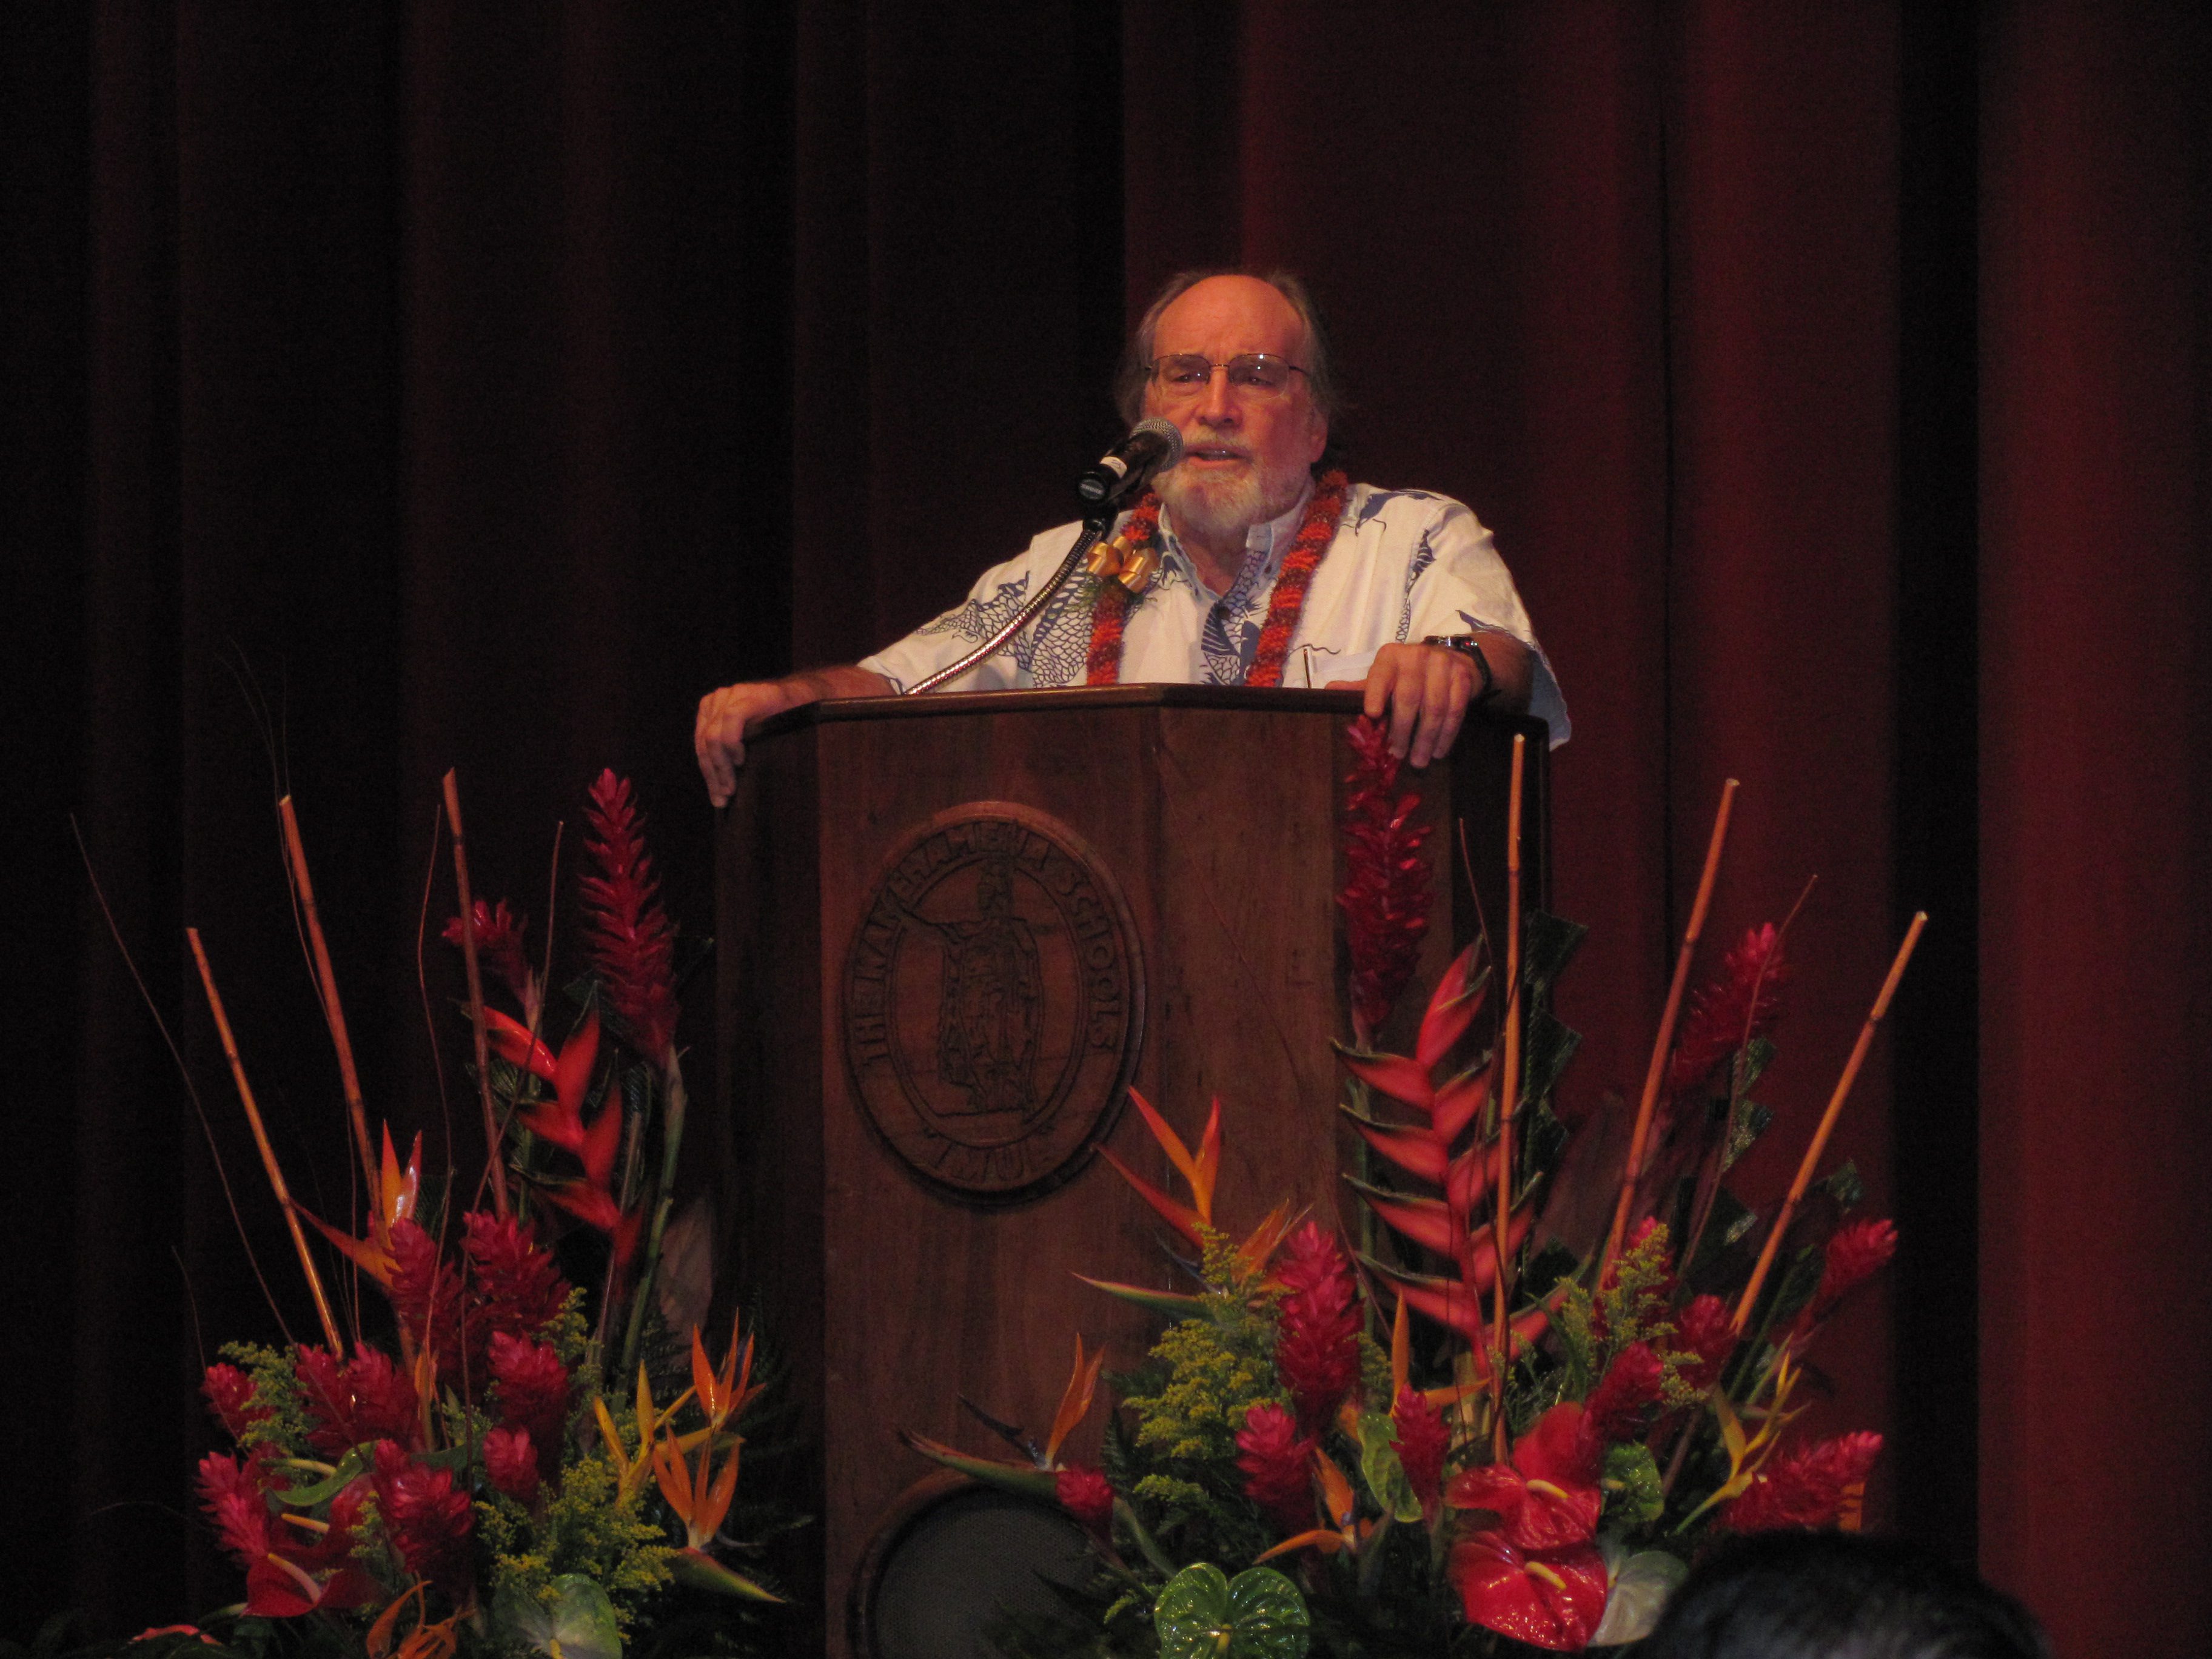 Governor of Hawaii Neil Abercrombie welcoming students to the Voices session at Kamehameha